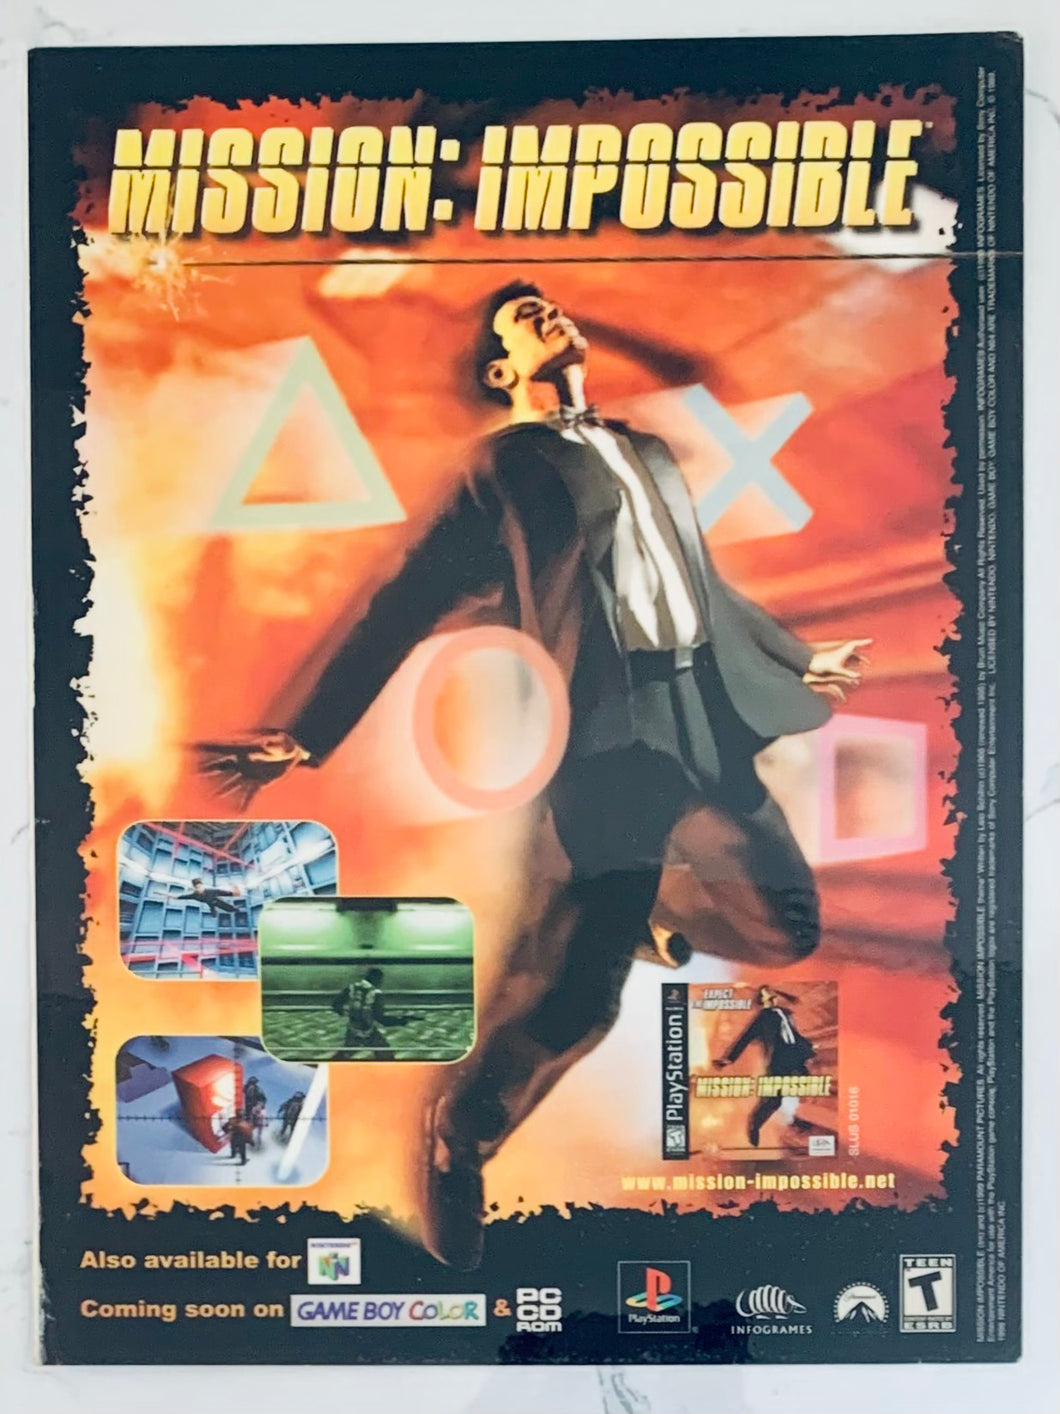 Mission: Impossible - PlayStation/N64/GBC - Original Vintage Advertisement - Print Ads - Laminated A4 Poster